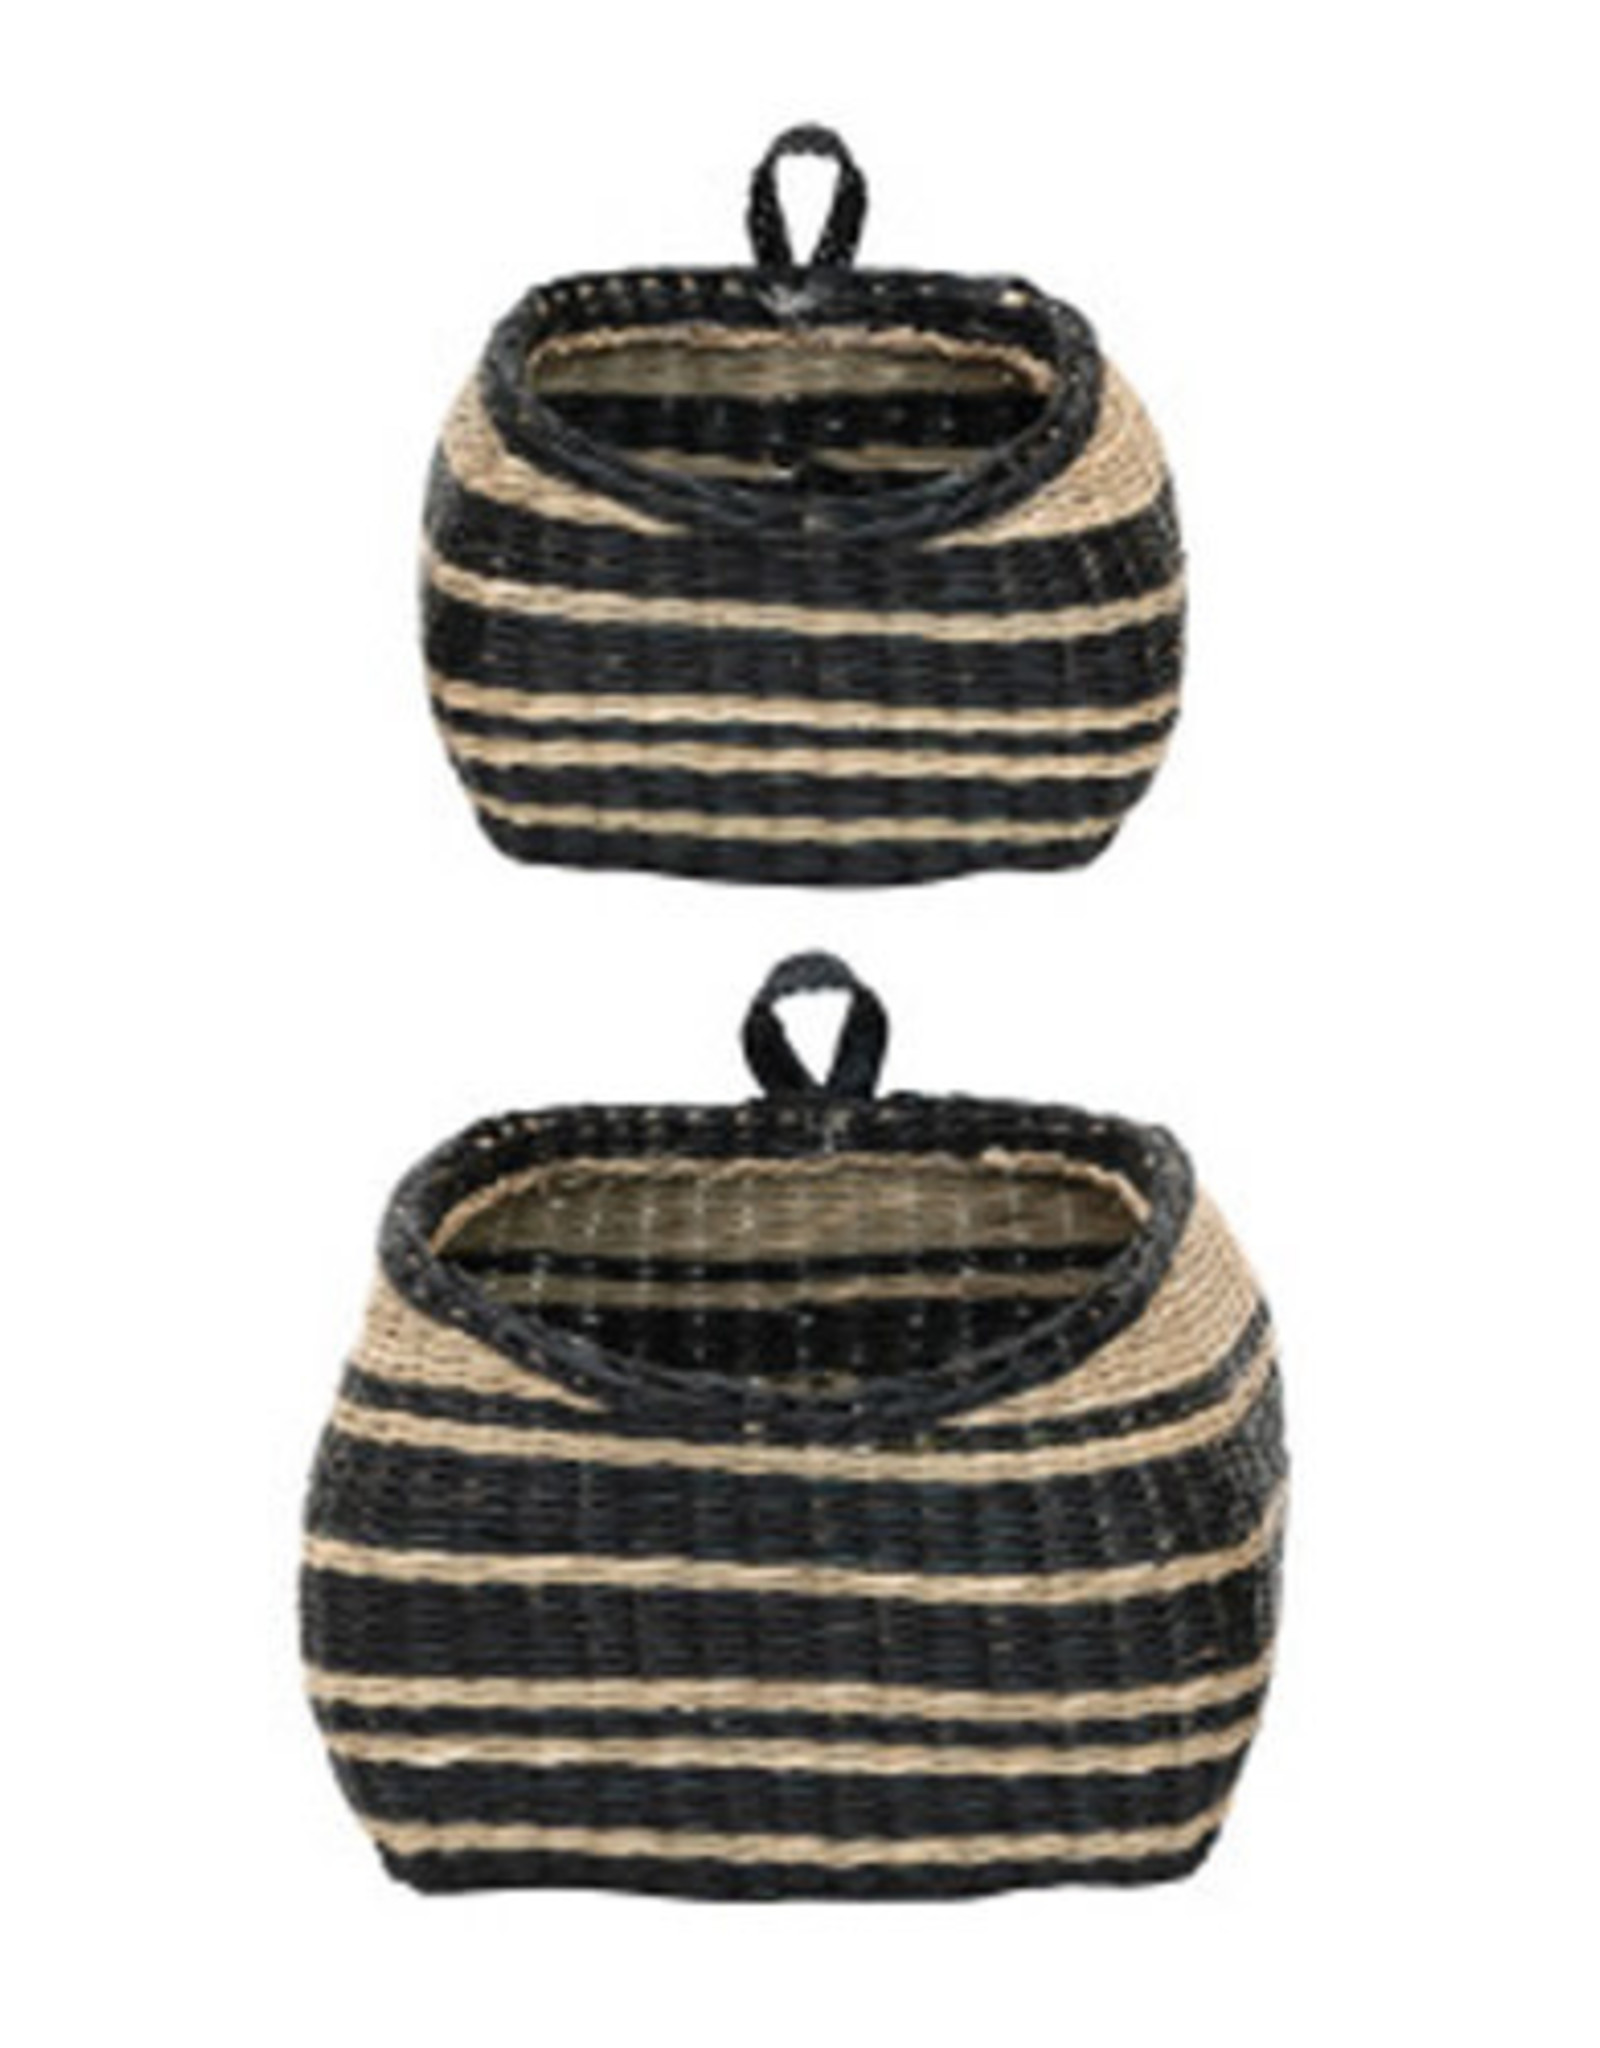 Handwoven Seagrass Baskets w/ Stripes - S/2